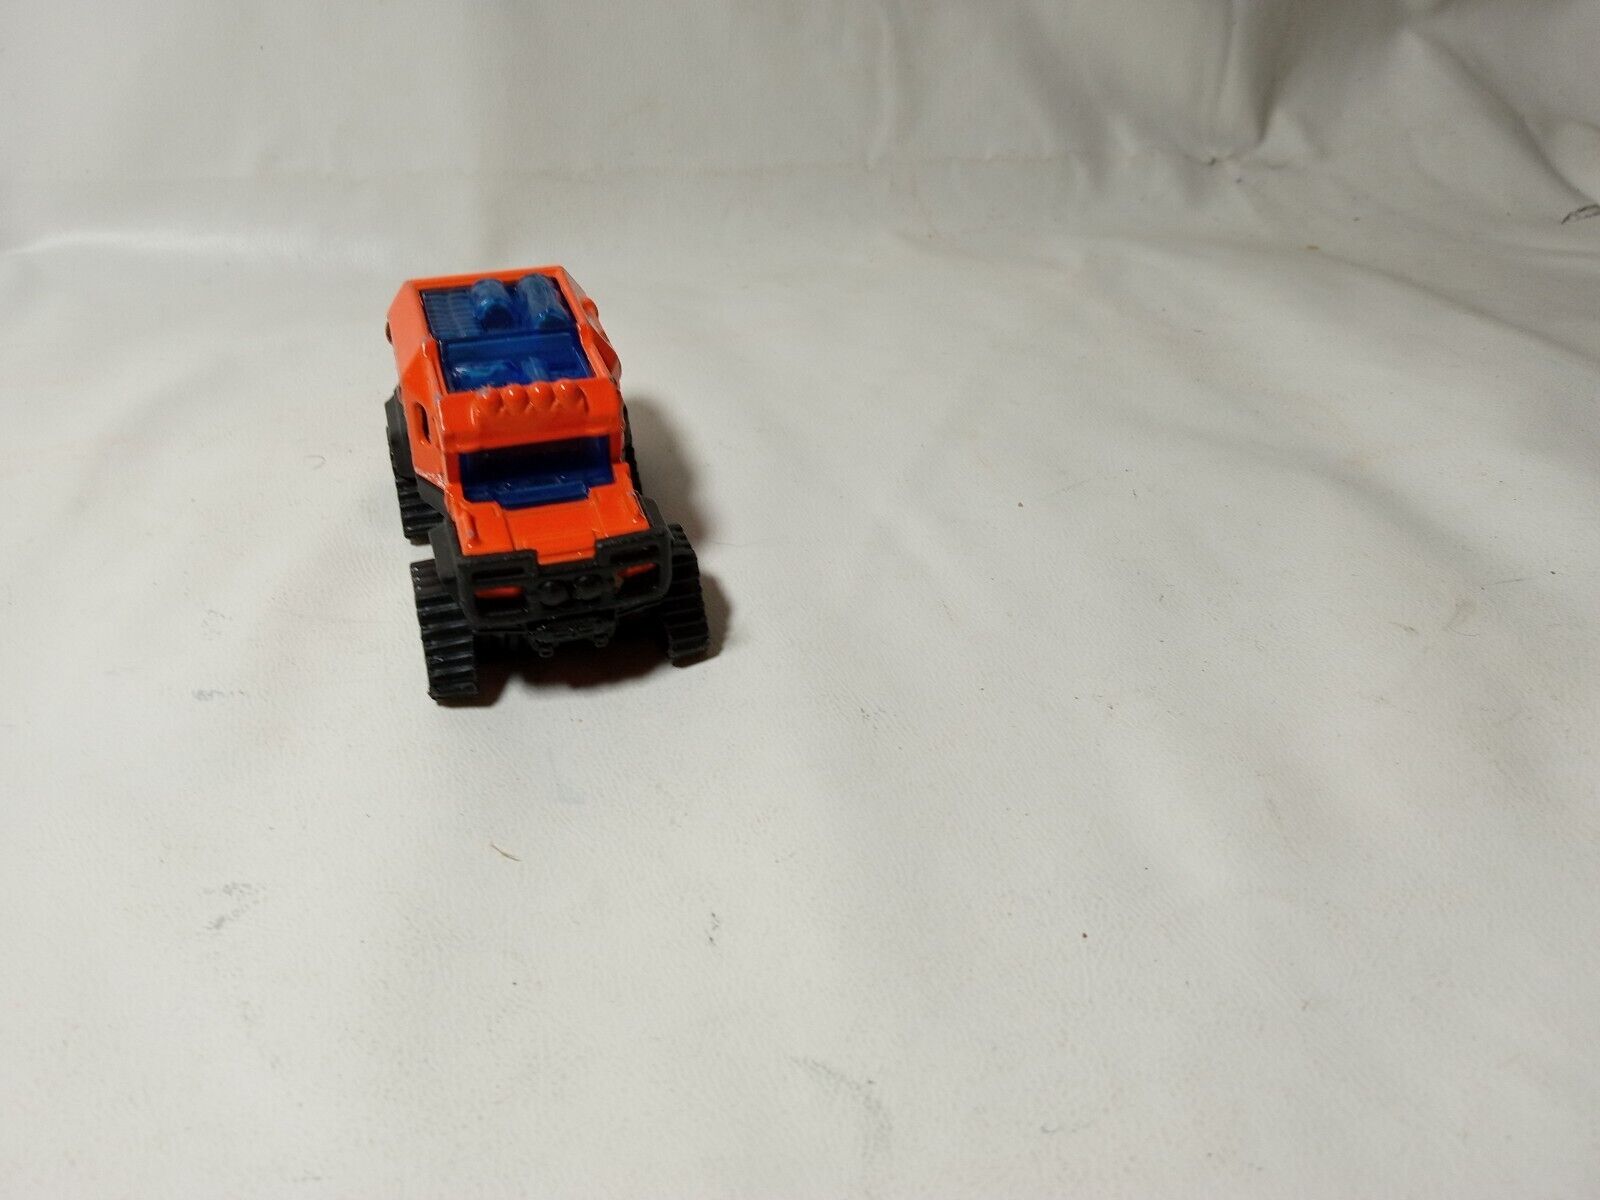 Pre-Owned Matchbox Orange Frost Fighter Vehicle